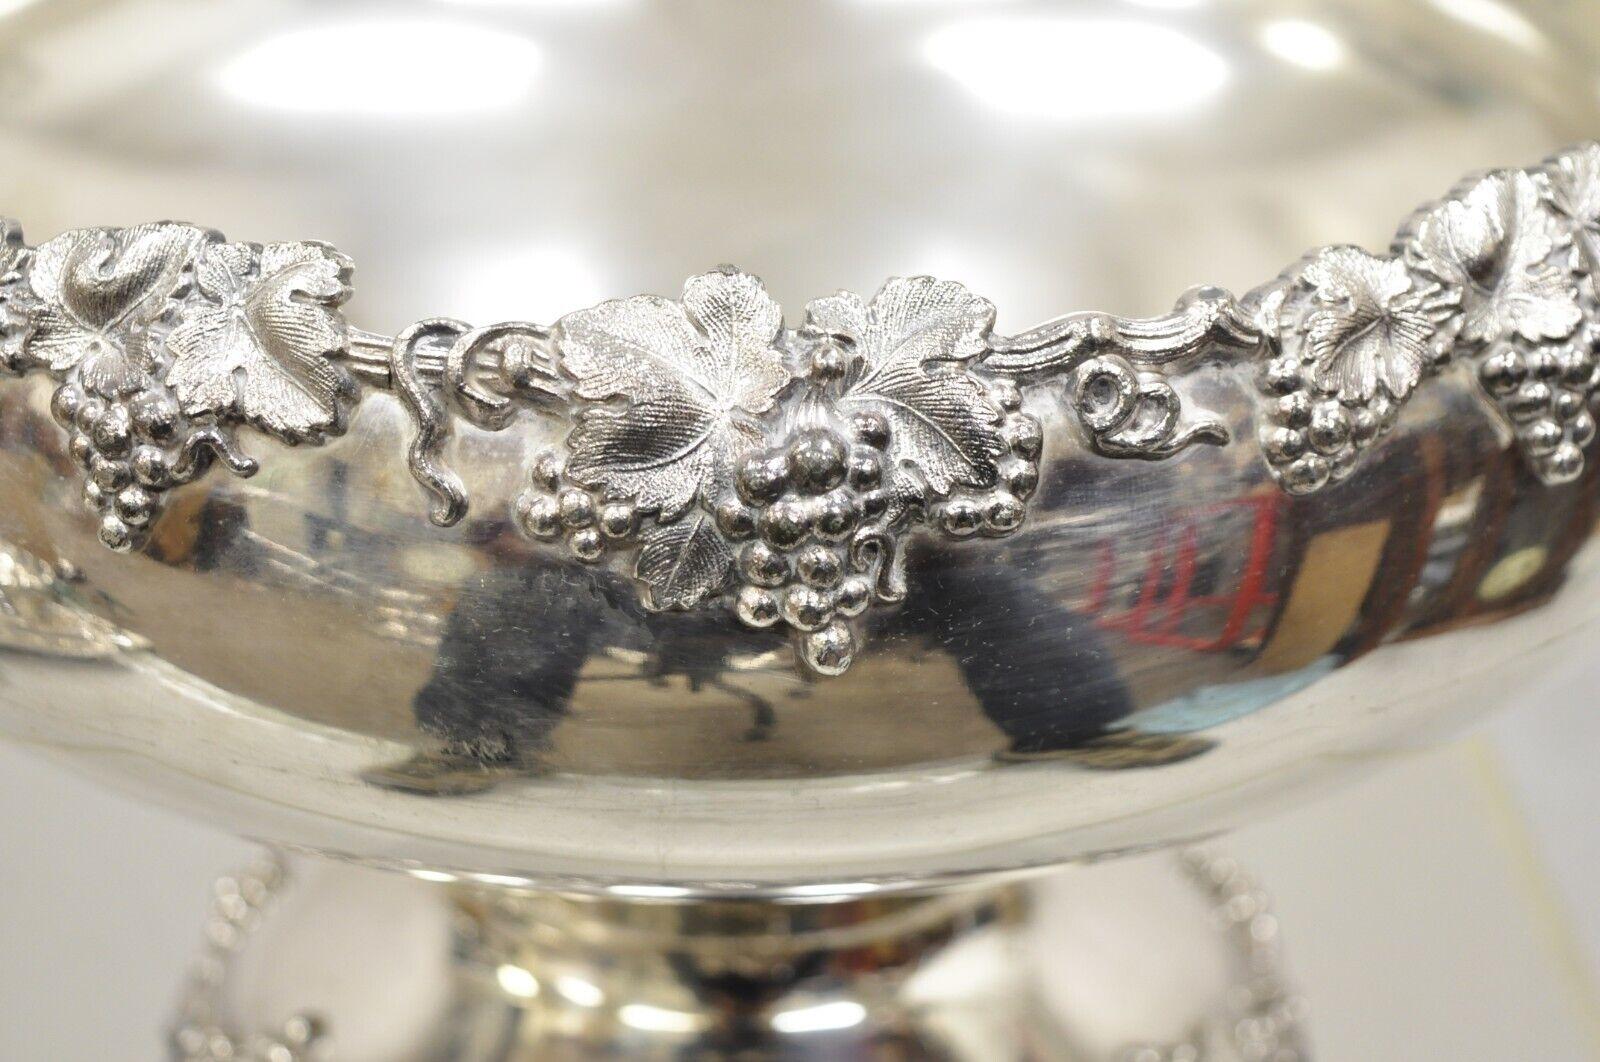 Vintage English Victorian Silver Plated Grapevine Pedestal Base Punch Bowl. Item features a unique grapevine and maple leaf pedestal base, shapely fluted form, original hallmark, very nice antique item. Circa  Early to Mid 20th Century.